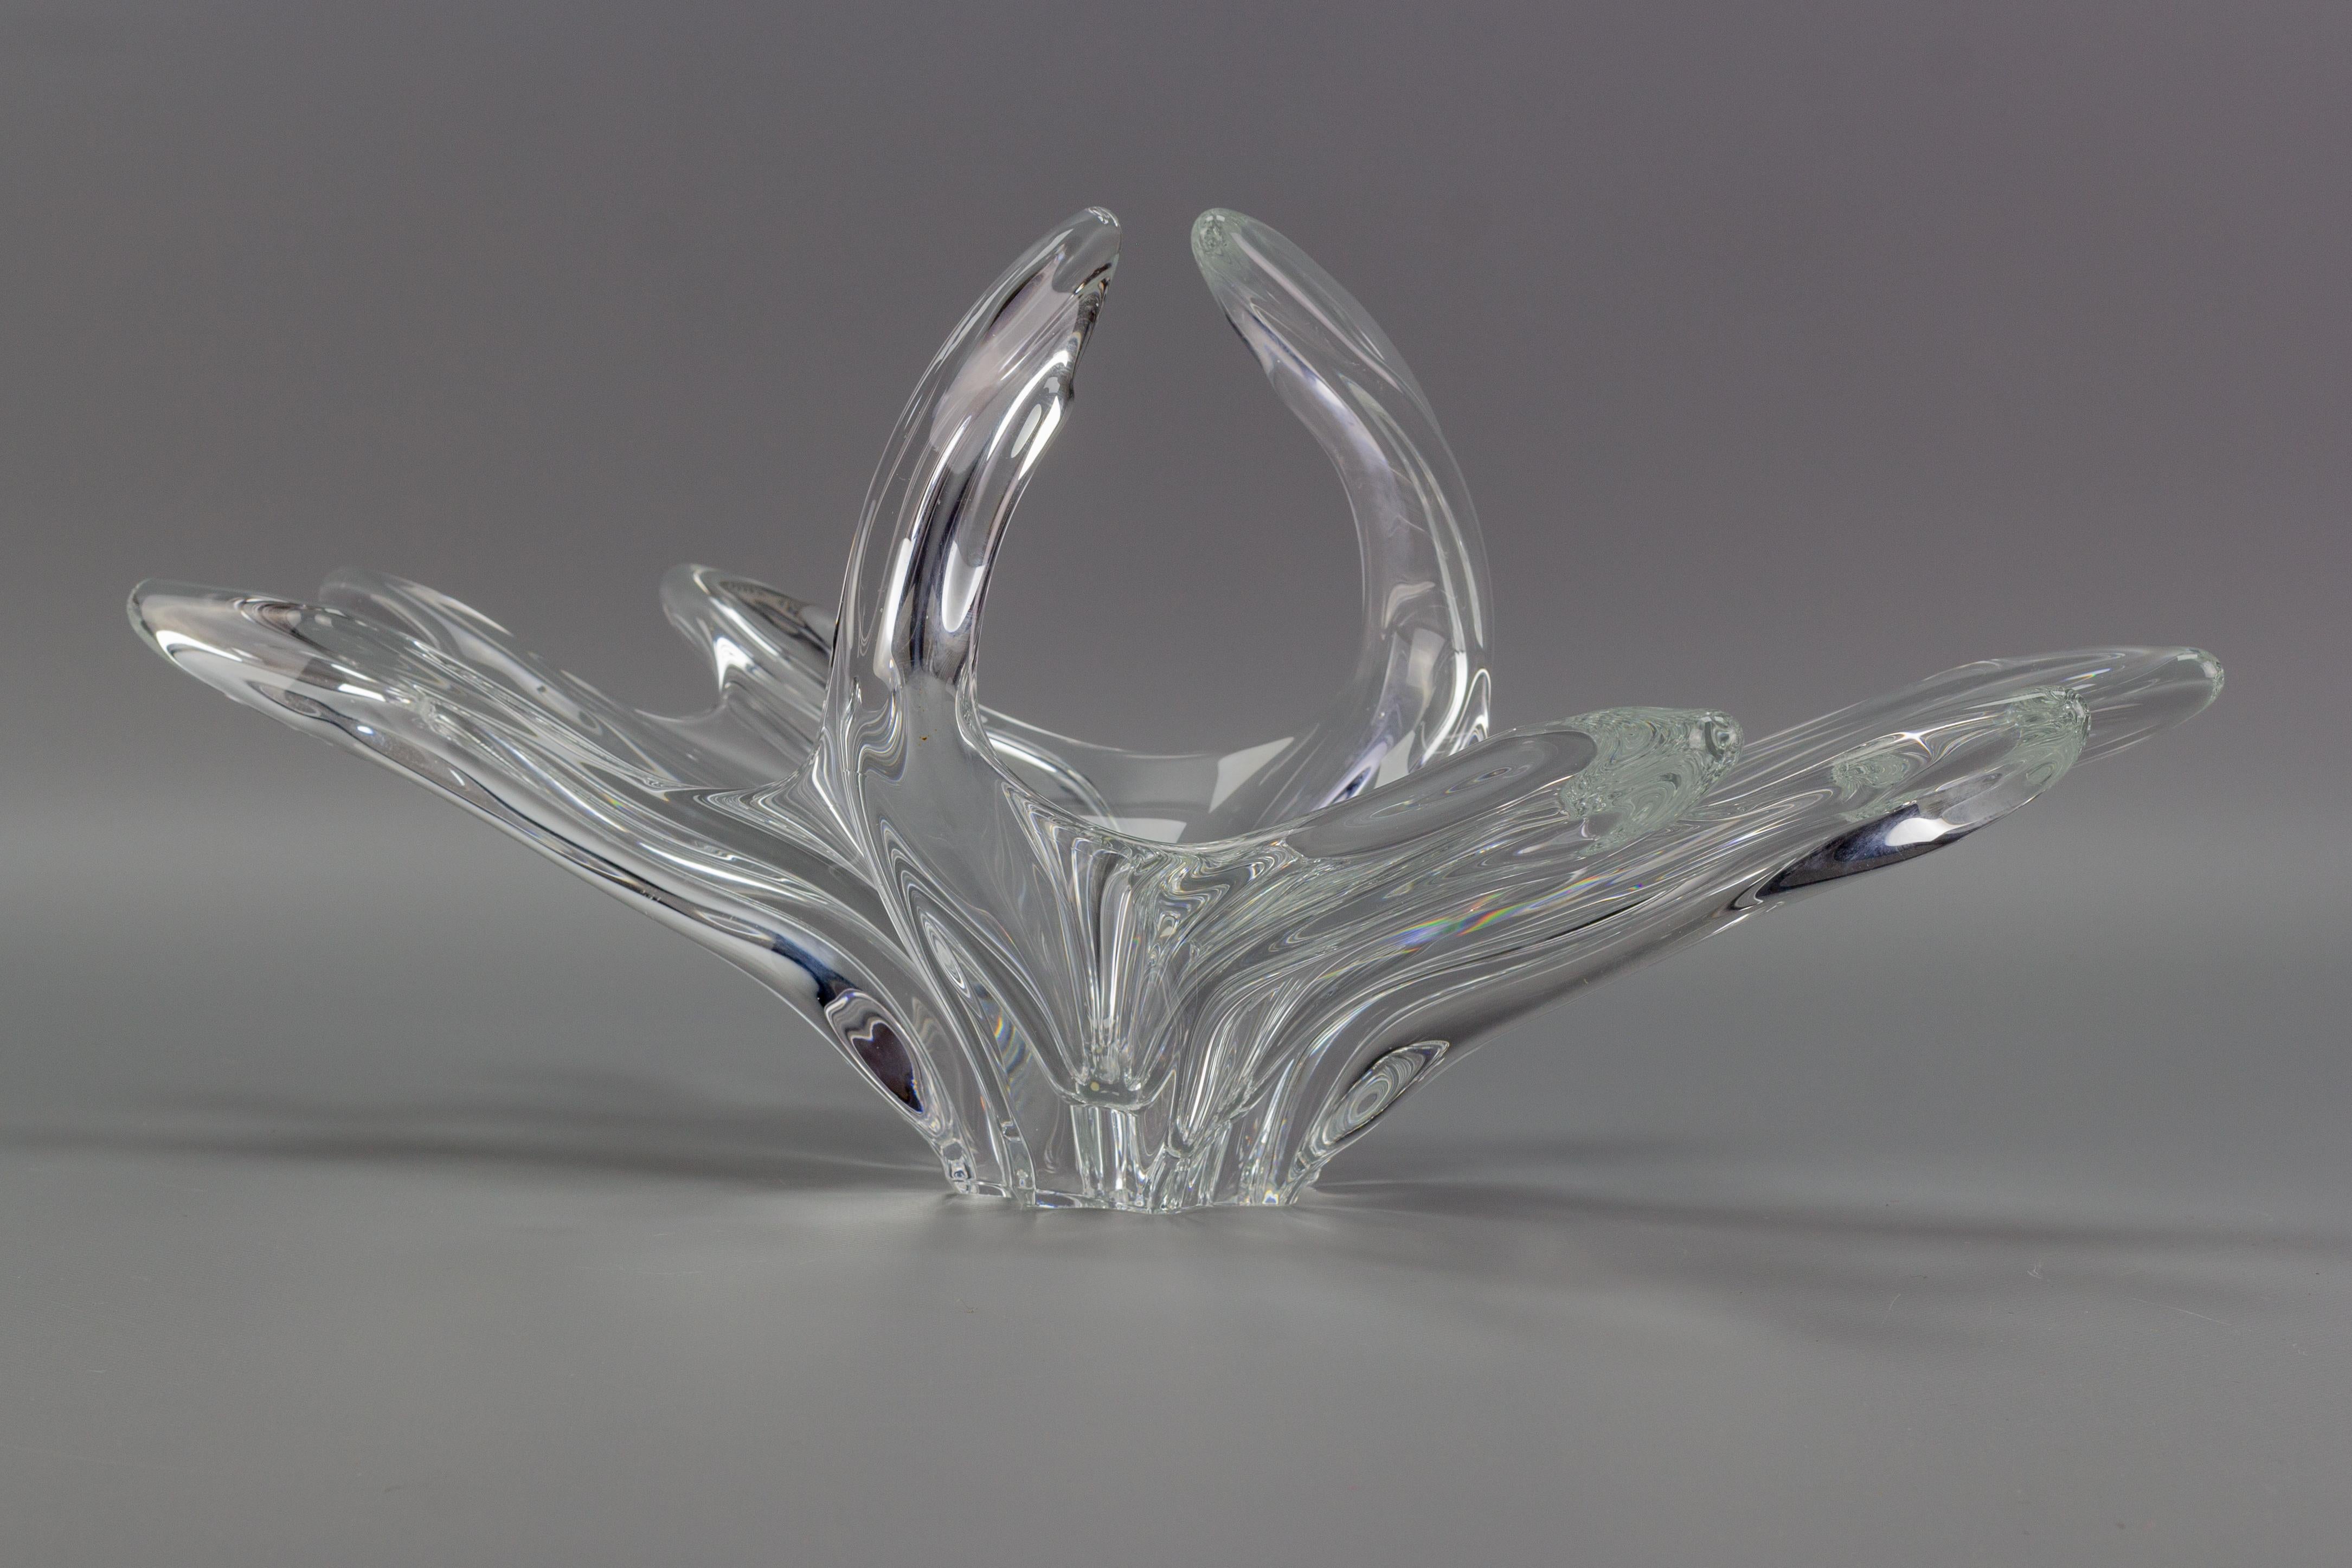 Adorable translucent hand-blown crystal glass fruit bowl or centerpiece by Art de Vannes France, 1960s. 
On the bottom marked with an etched factory mark Art Vannes France.
Dimensions: height: 22 cm / 8.66 in; width: circa 18 cm / 7.08 in; length: